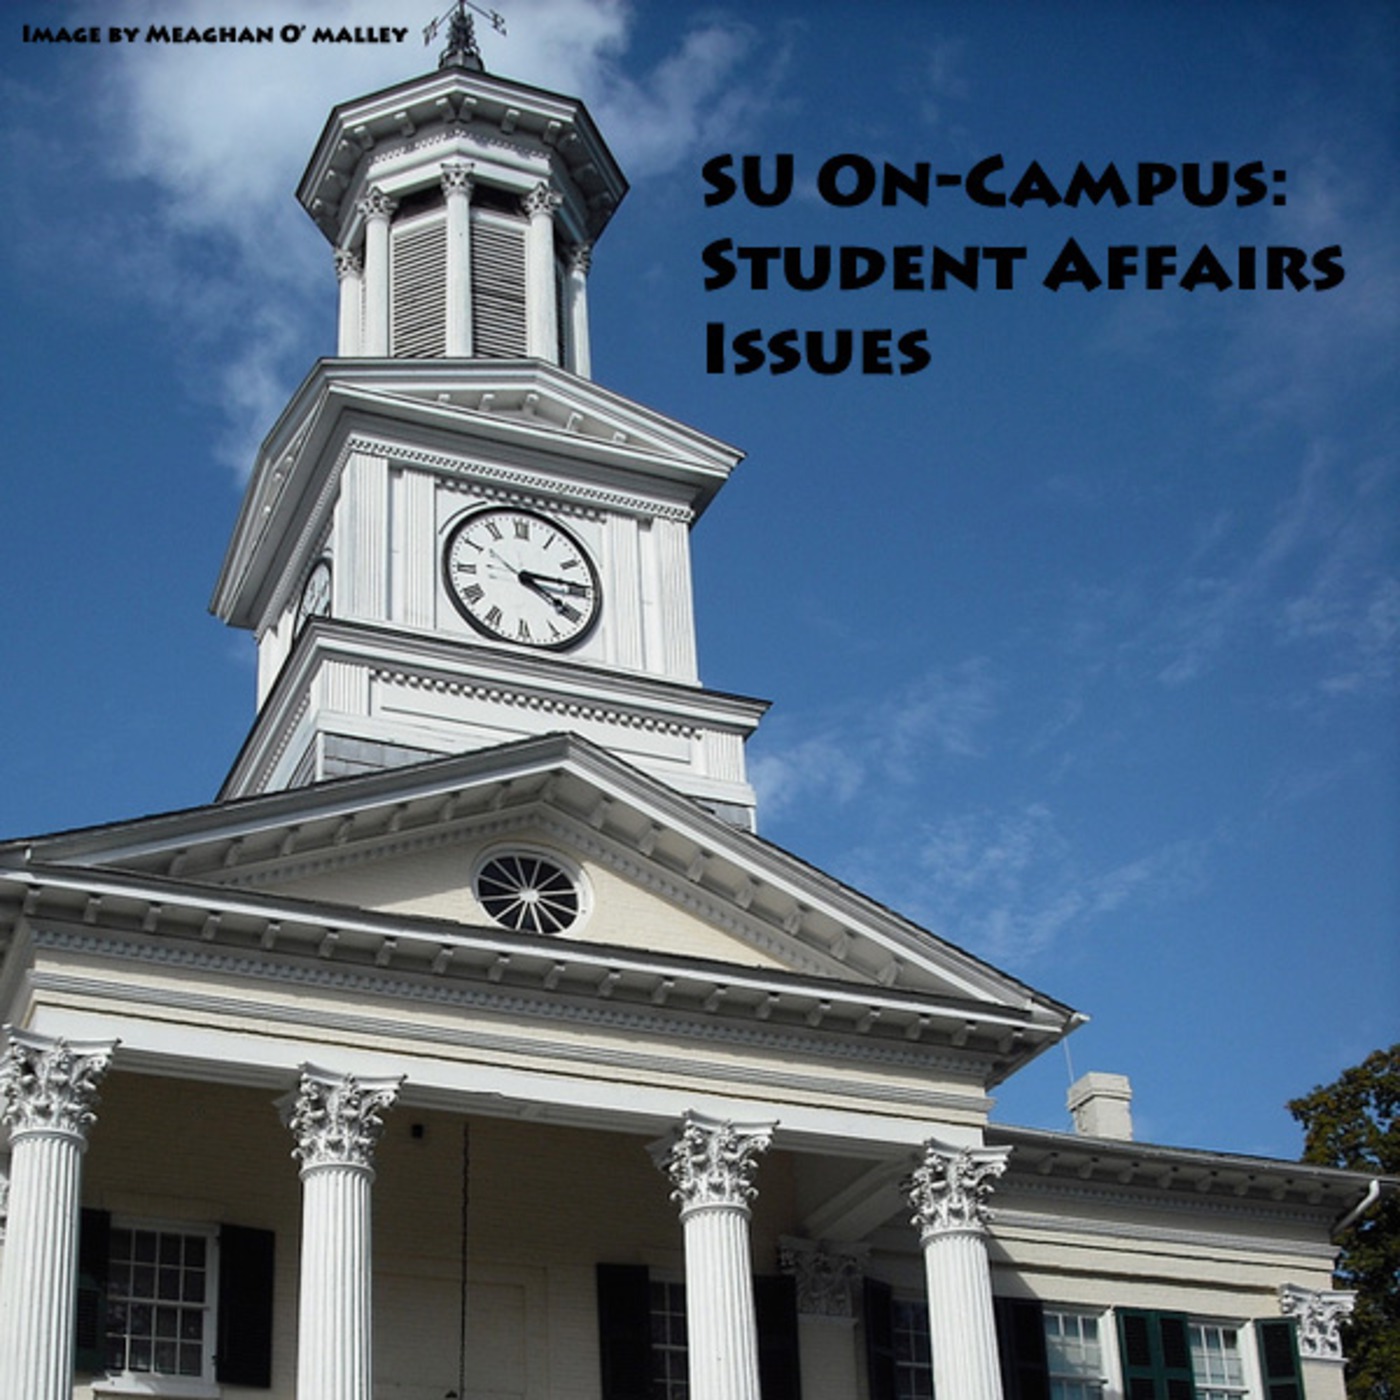 SU On-Campus: Student Affairs Issues